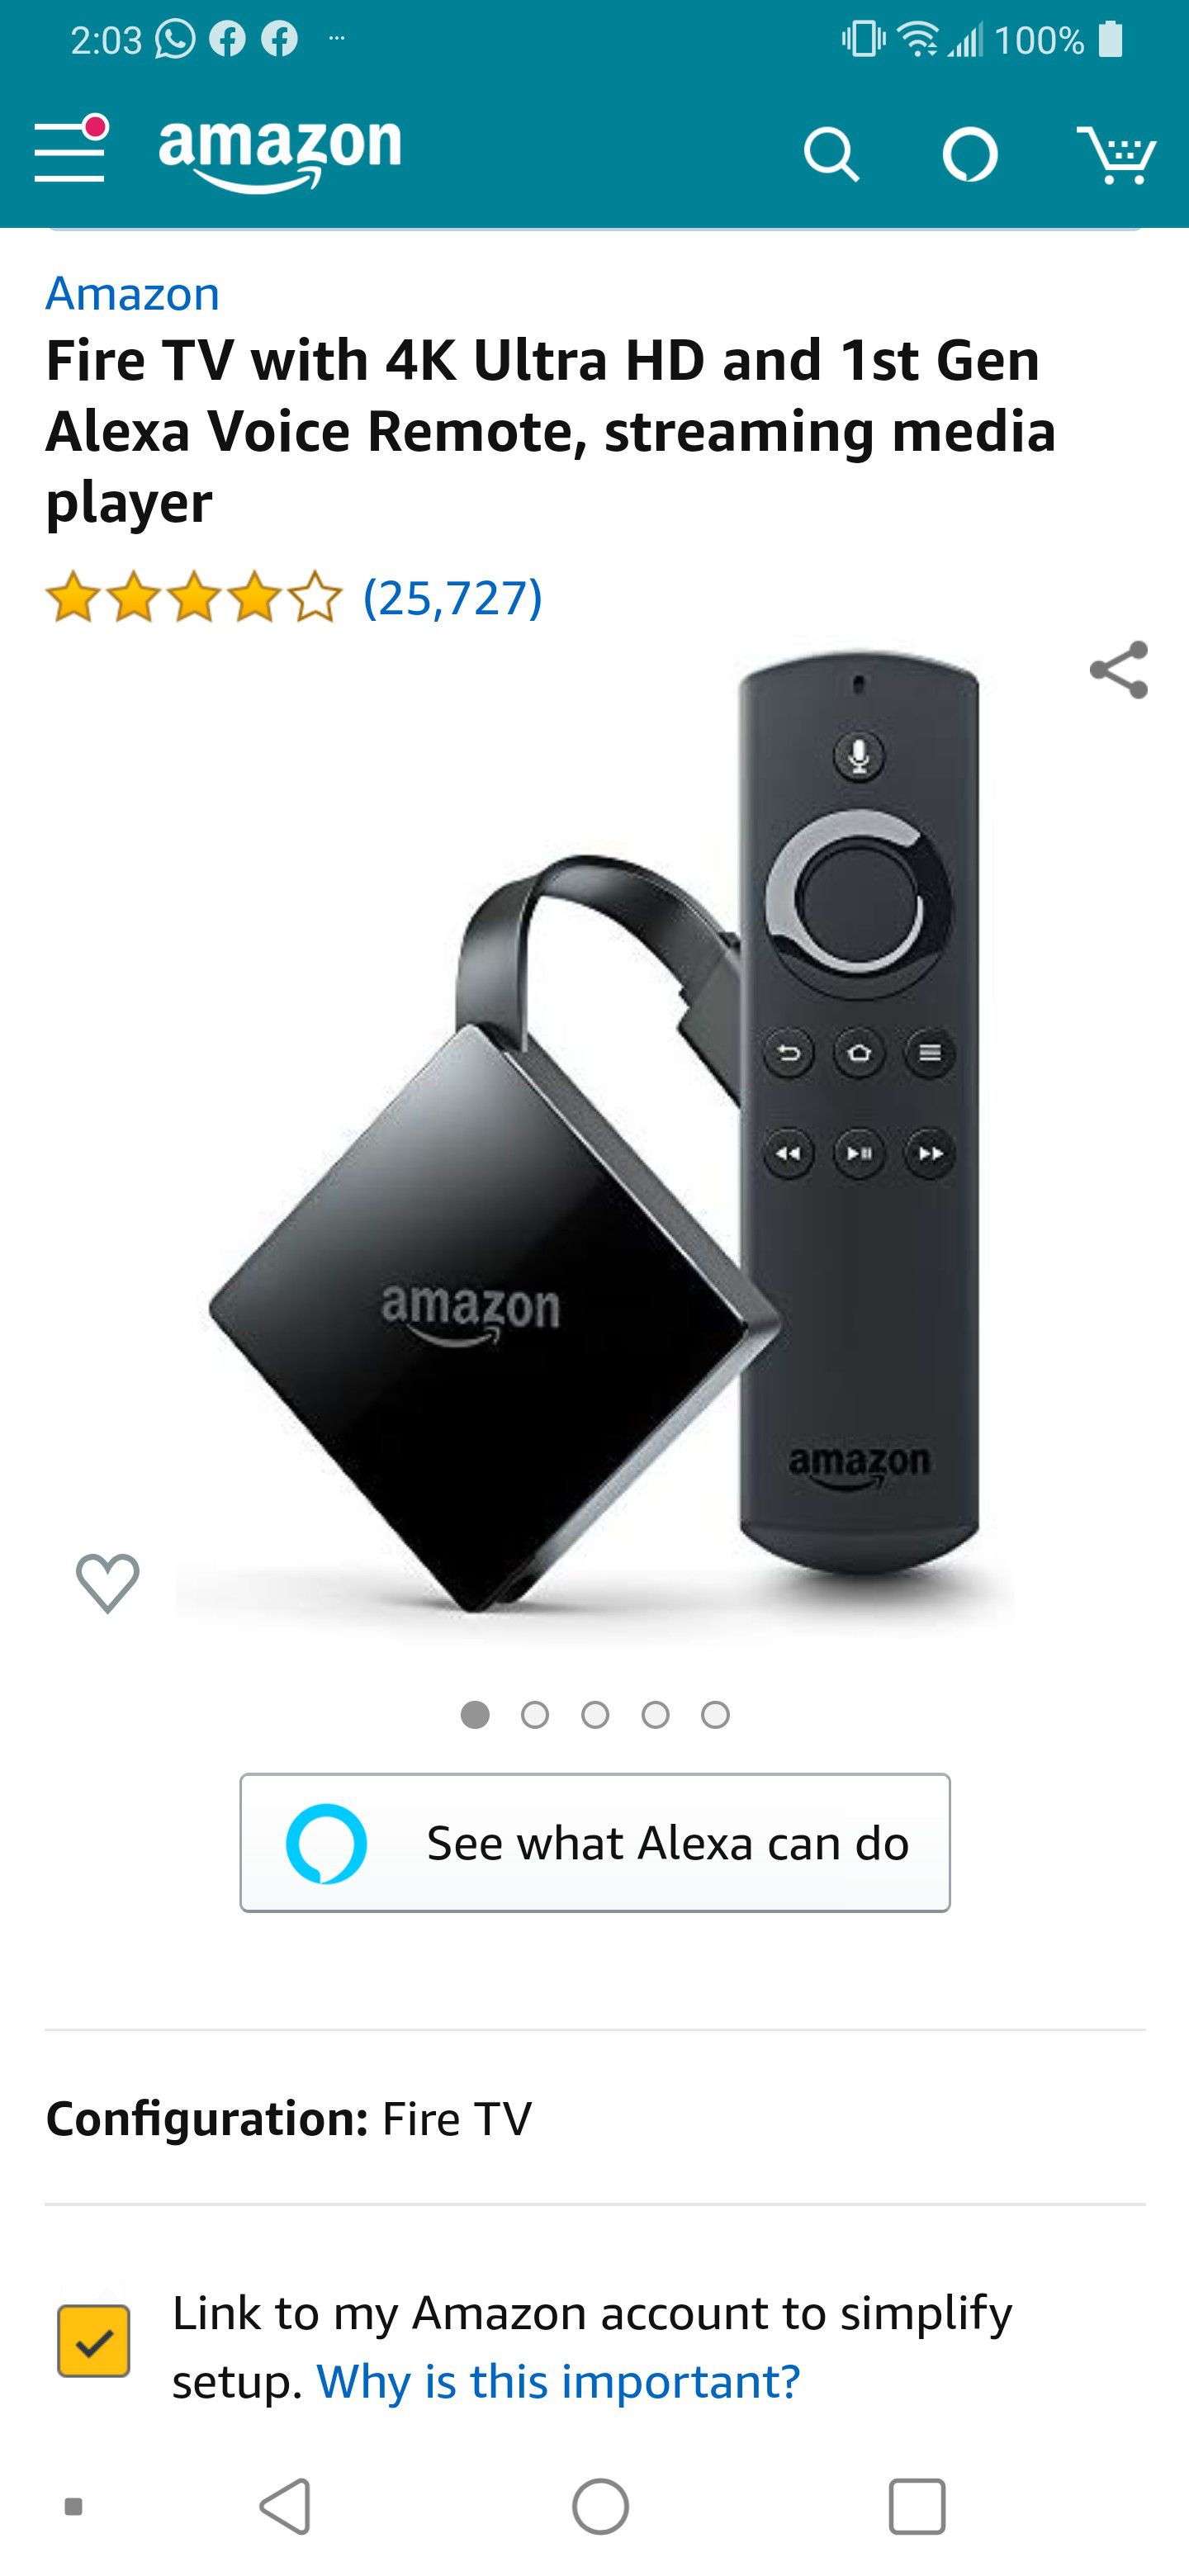 Amazon Fire TV with 4k and Alexa